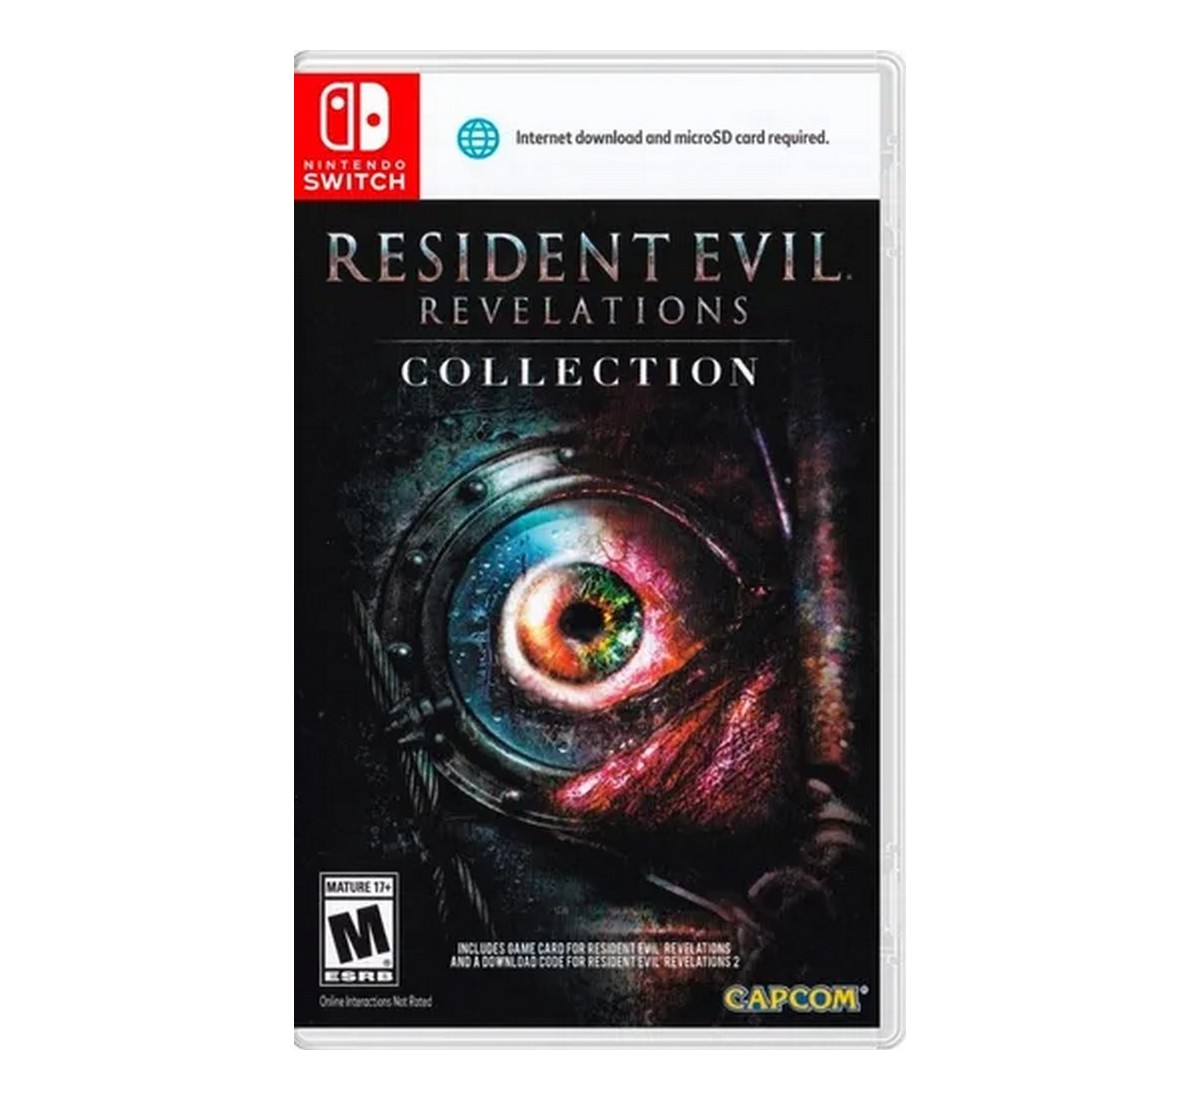 RESIDENT EVIL REVELATIONS COLLECTION NSW